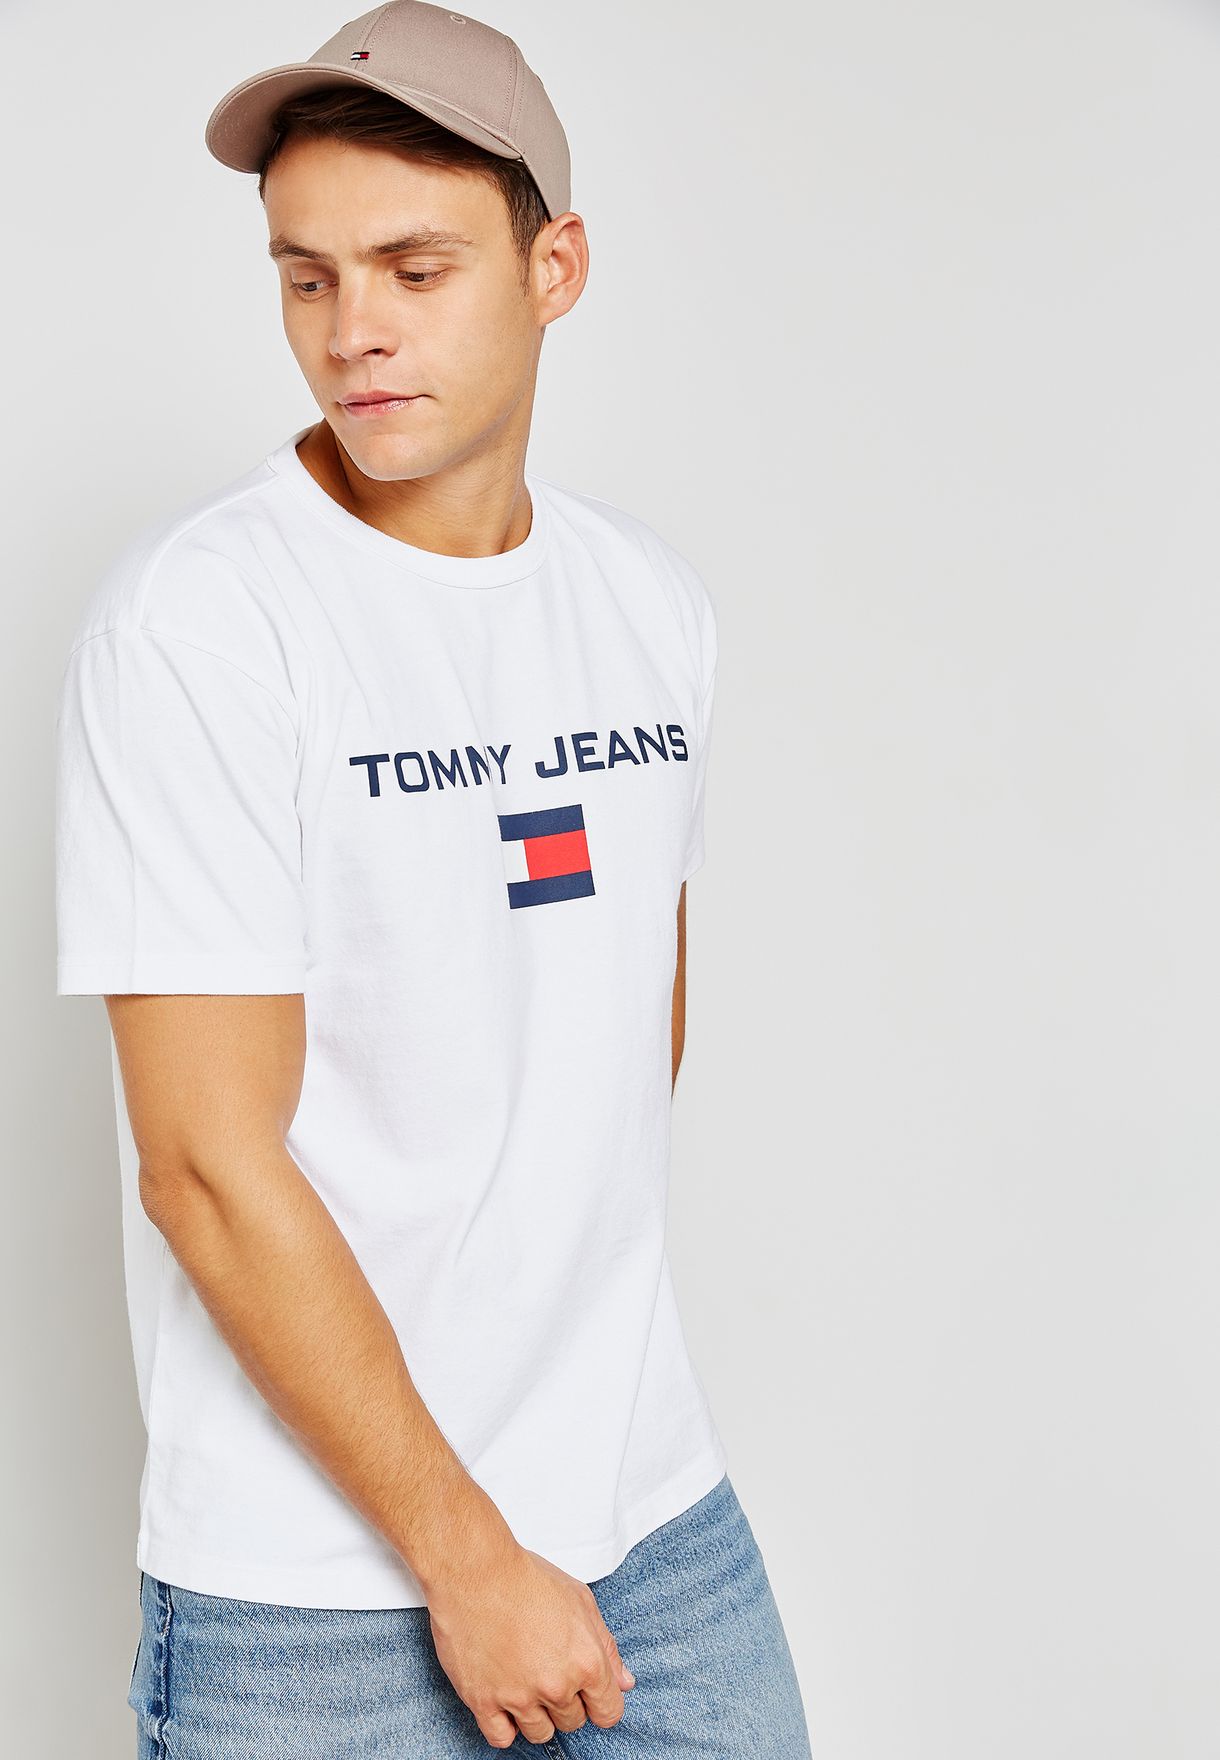 tommy jeans white tee